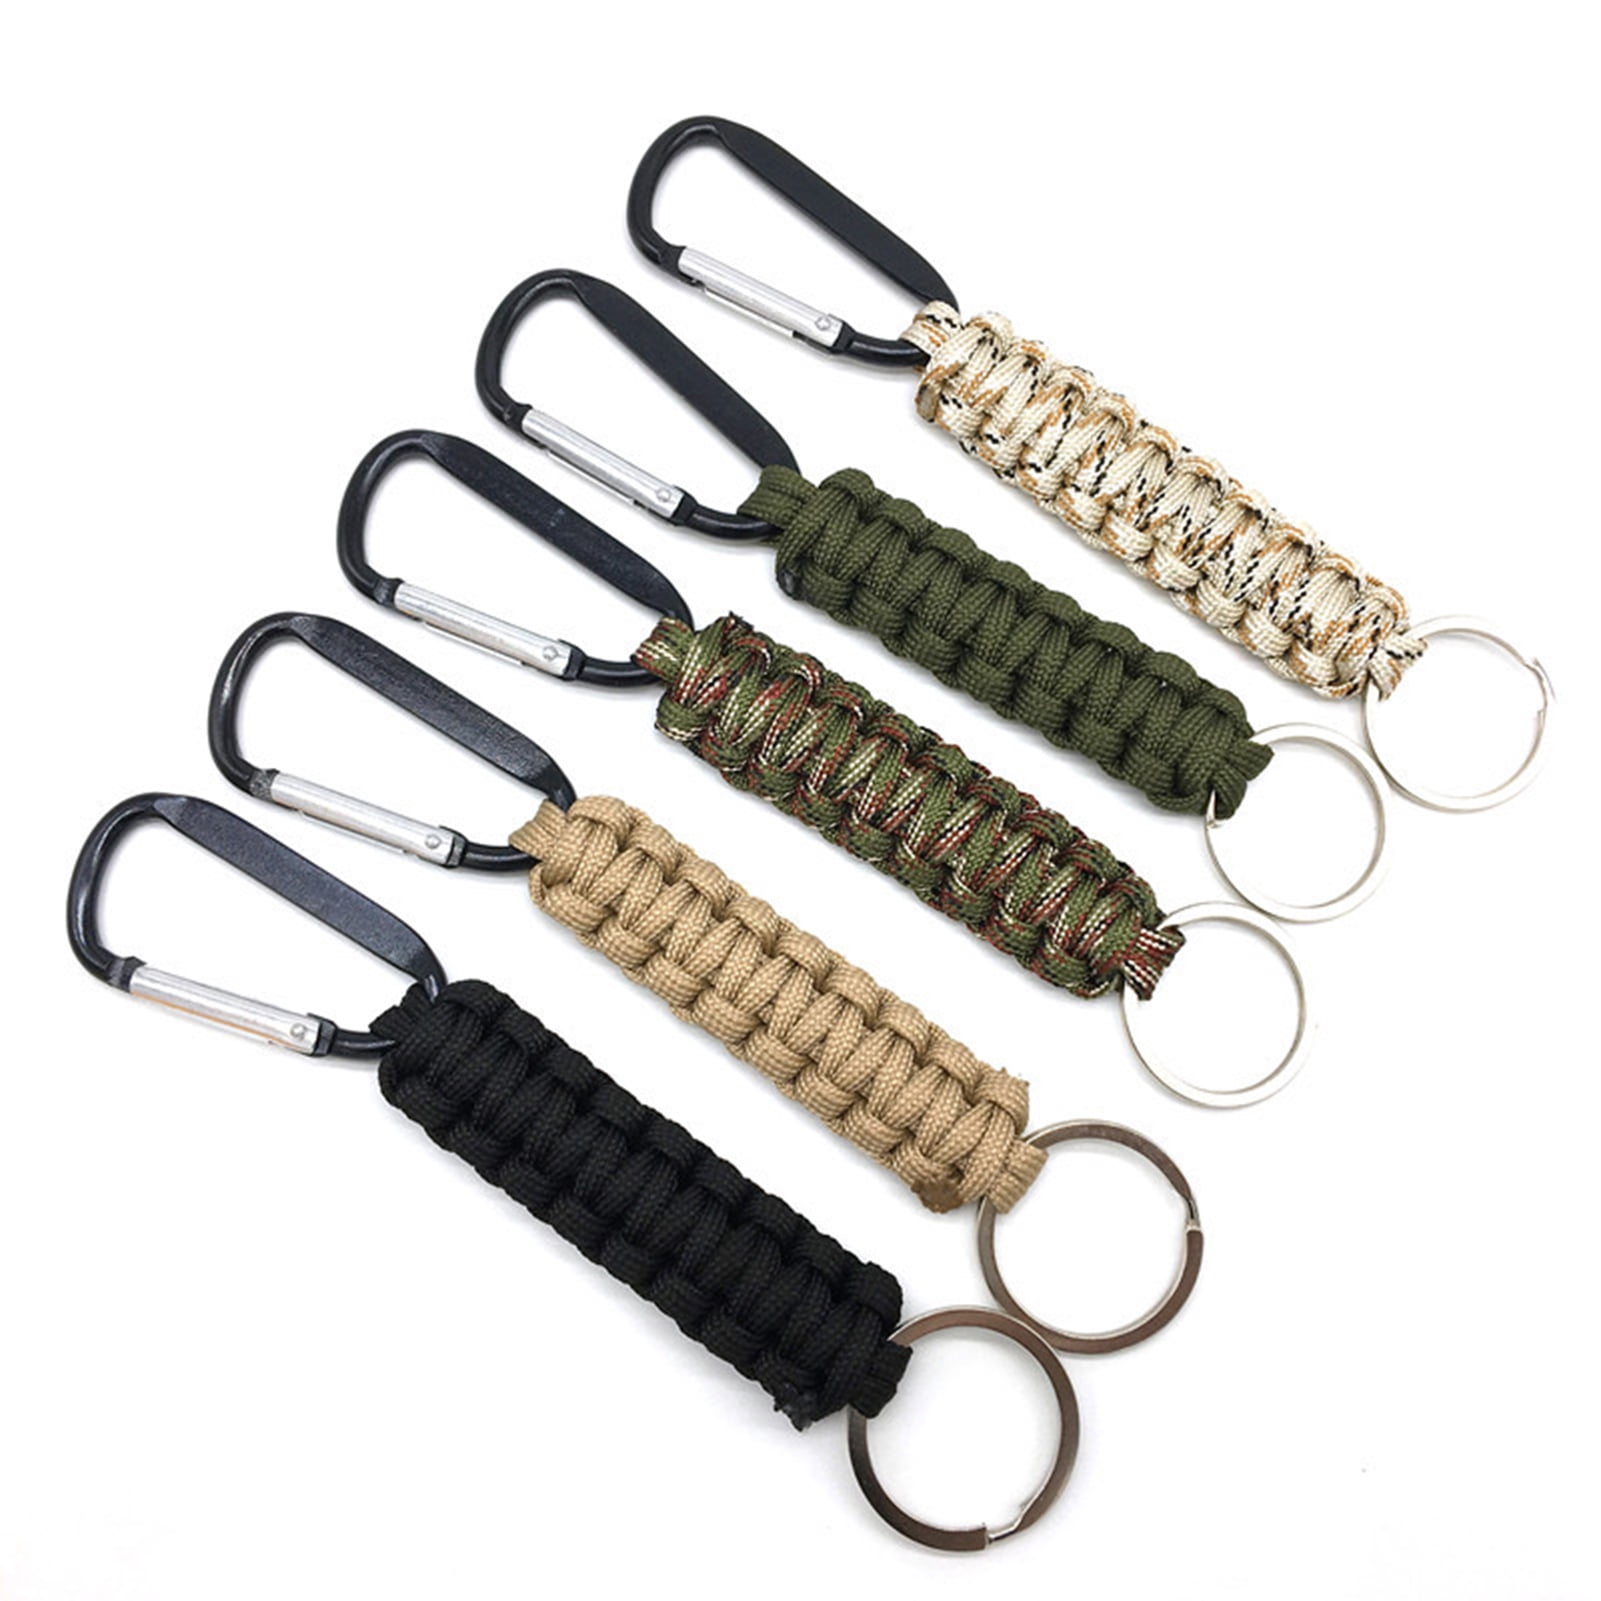 Premium Quality Camping Gear Paracord Survival Keychain Black 